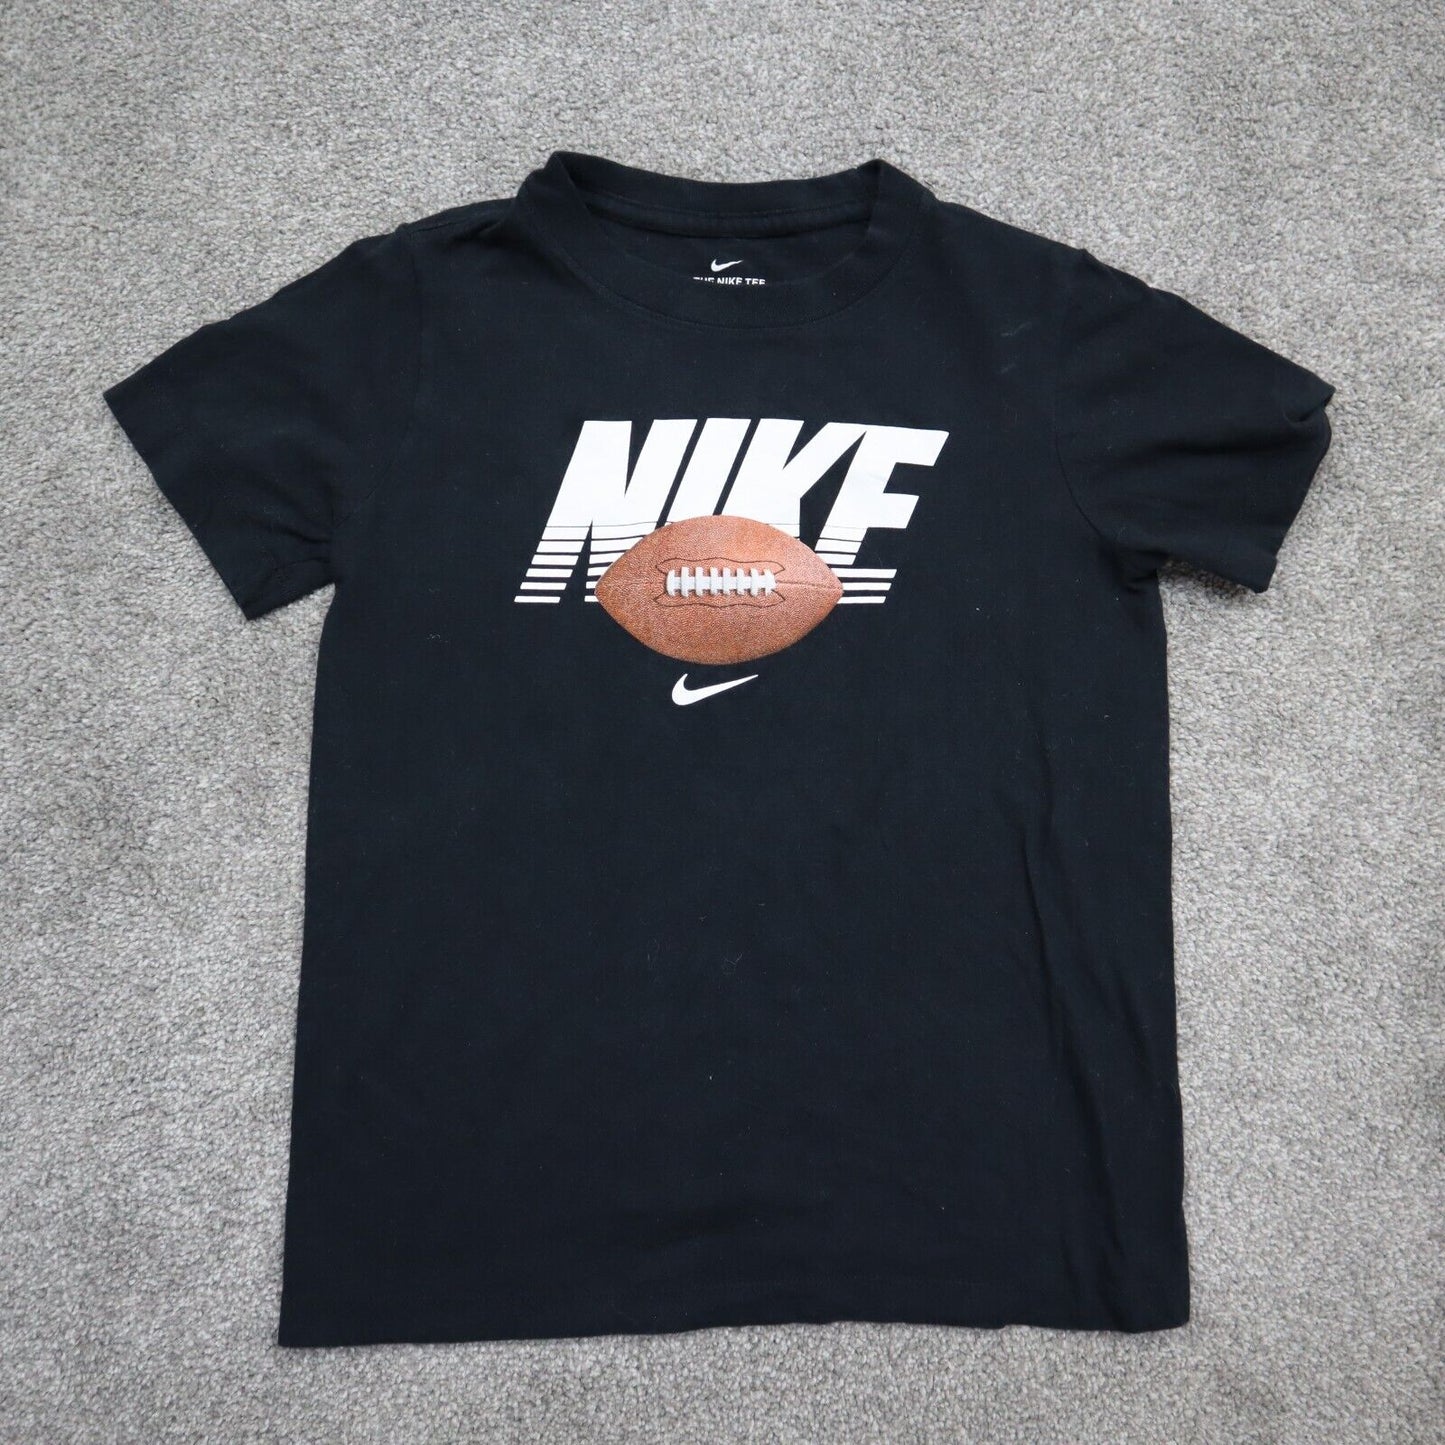 Nike T Shirt Girls Size Small Black Solid Short Sleeve Graphic Tee Crew Neck